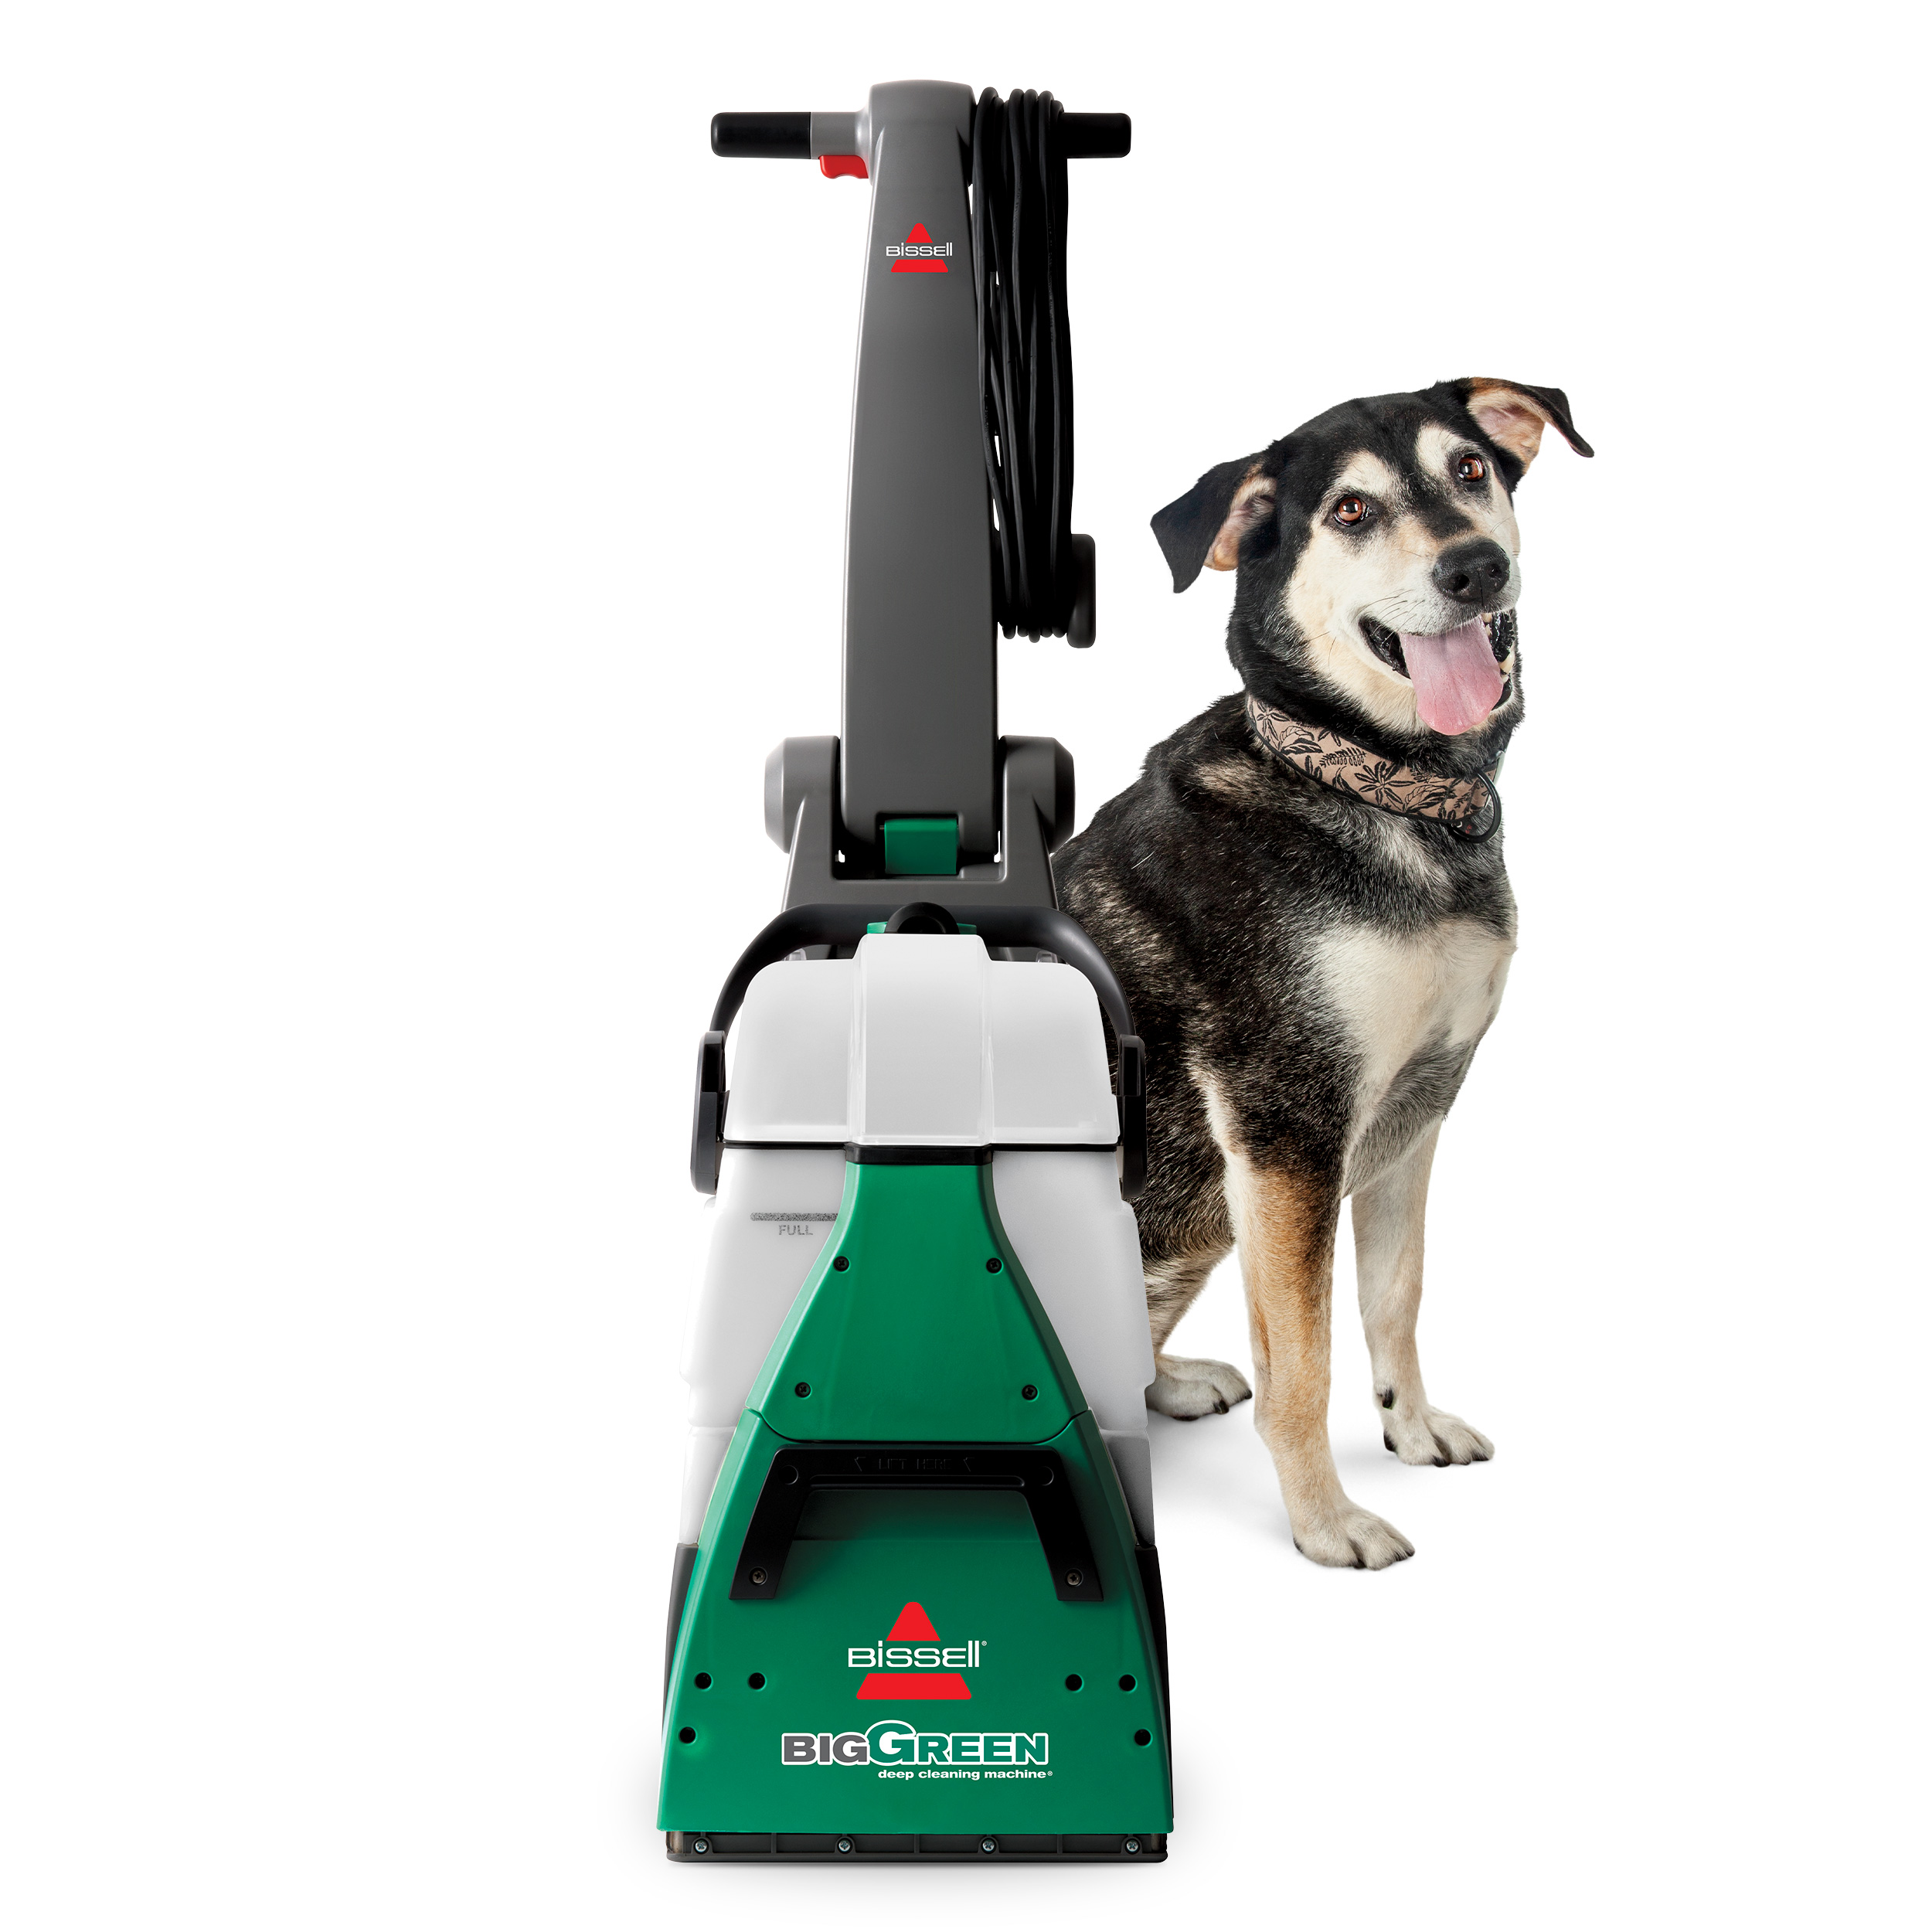 BISSELL Big Green Machine Professional Carpet Cleaner, 86T3 - image 12 of 20